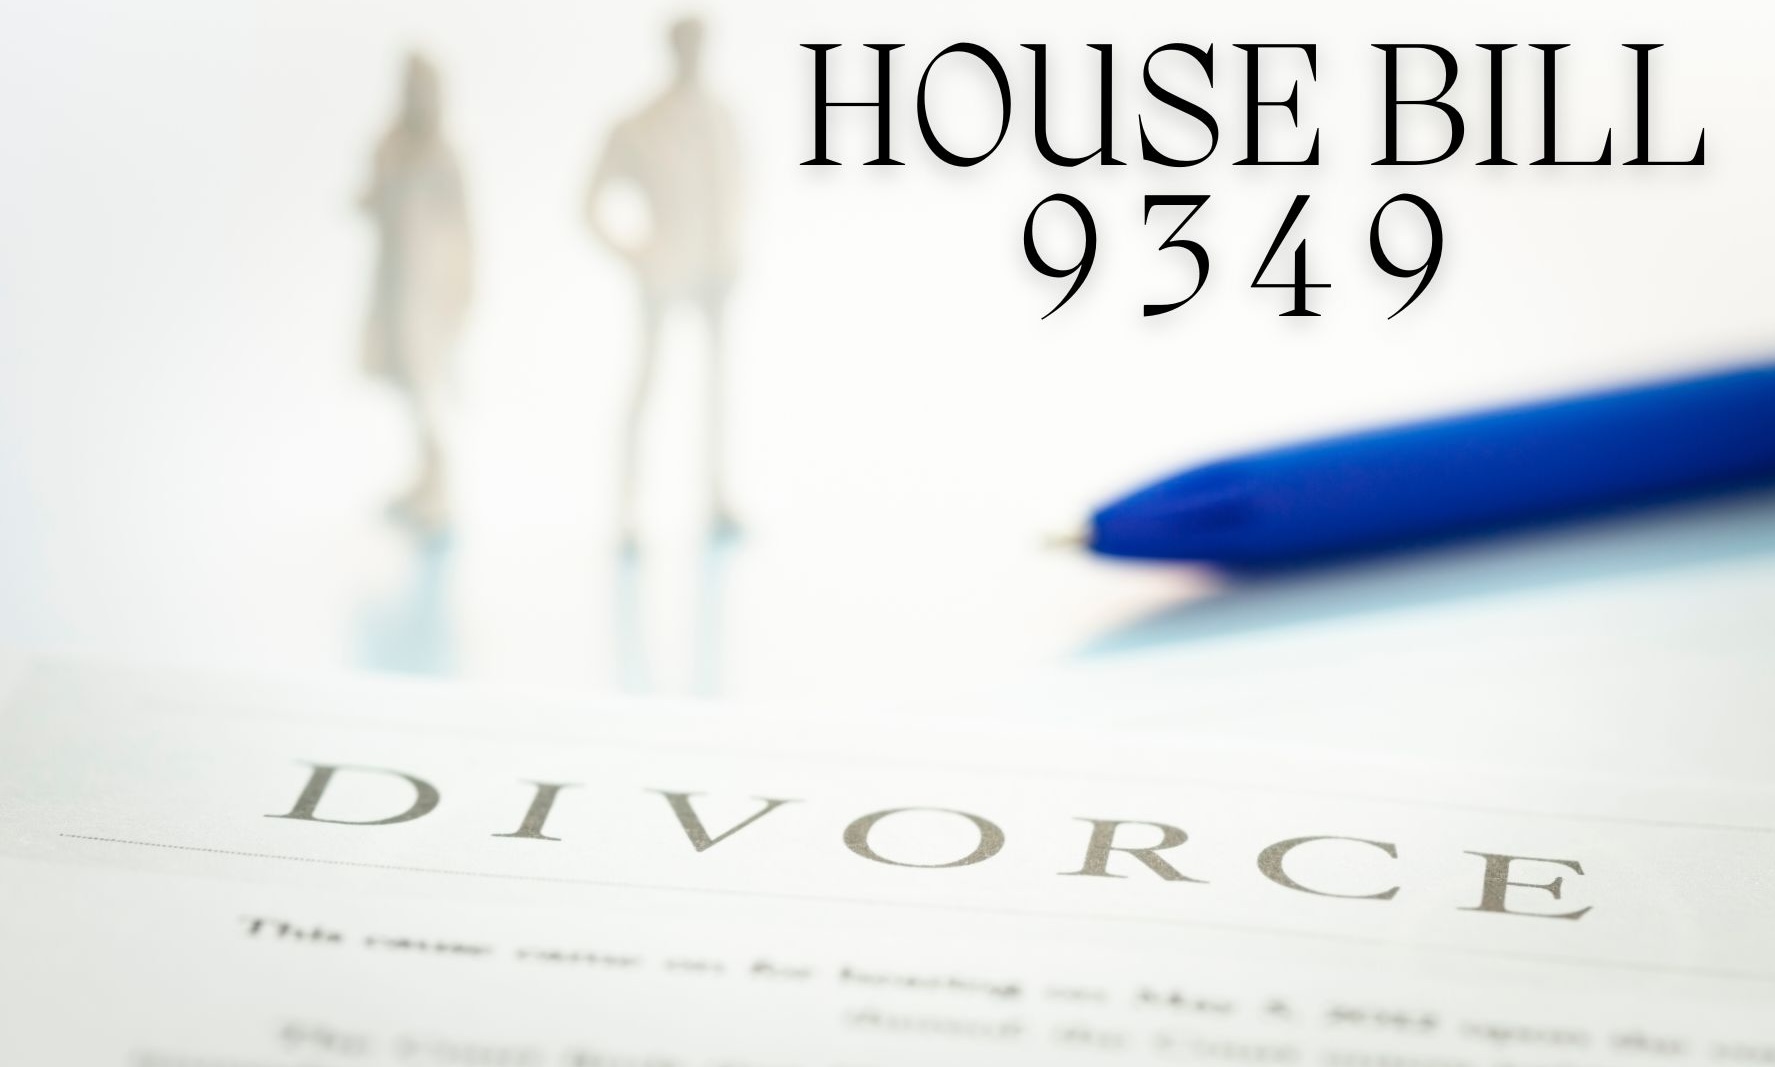 The House of Representatives approved House Bill 9349 or the Absolute Divorce bill on third and final reading last May 22